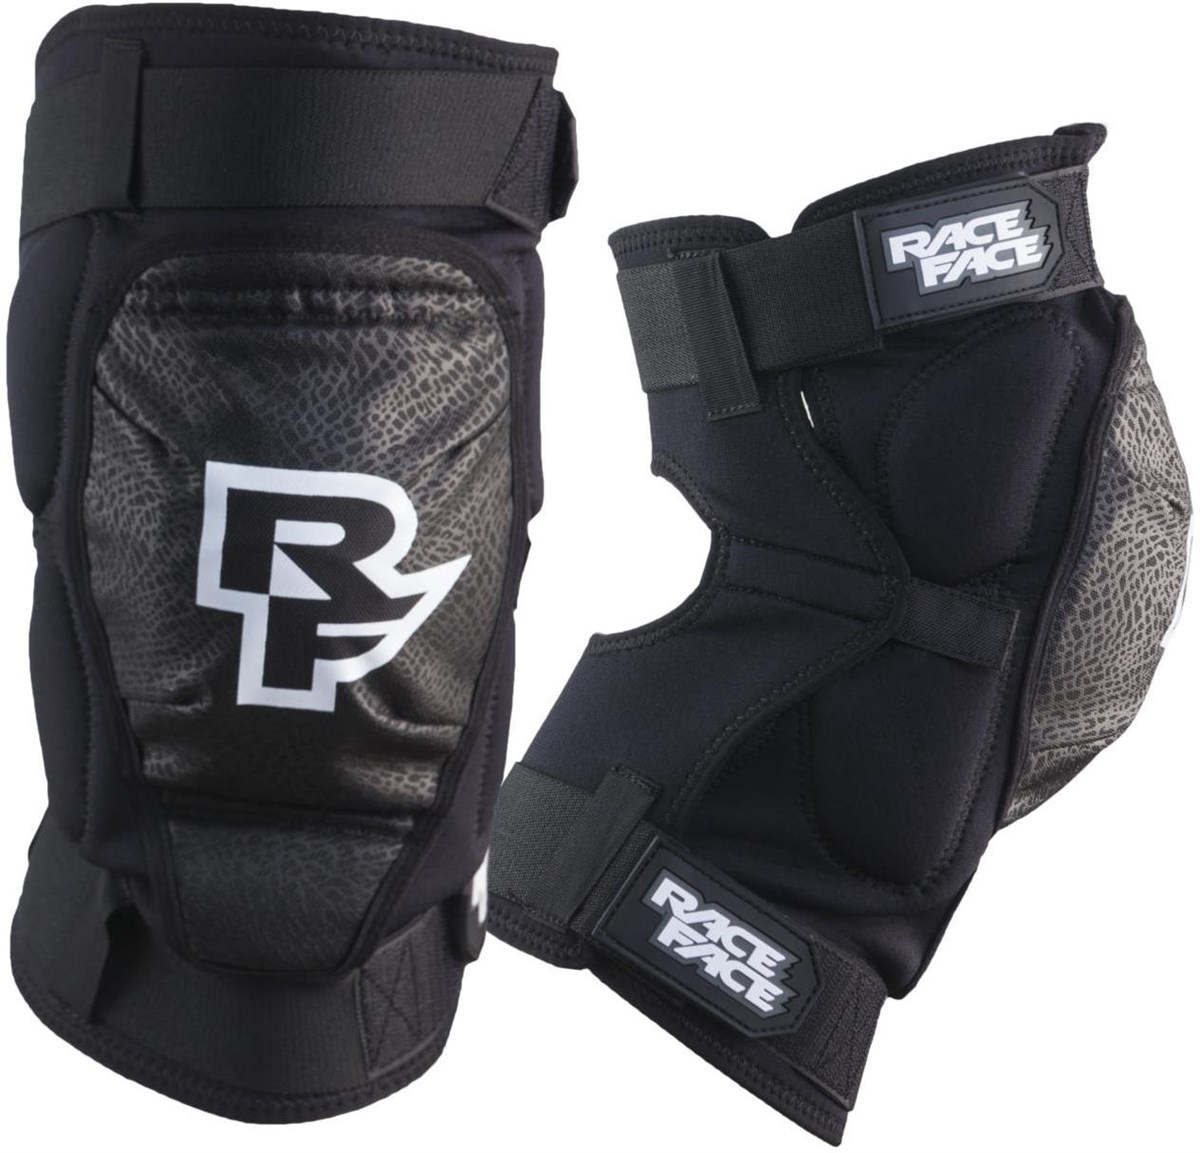 Race Face Dig Knee Guard product image